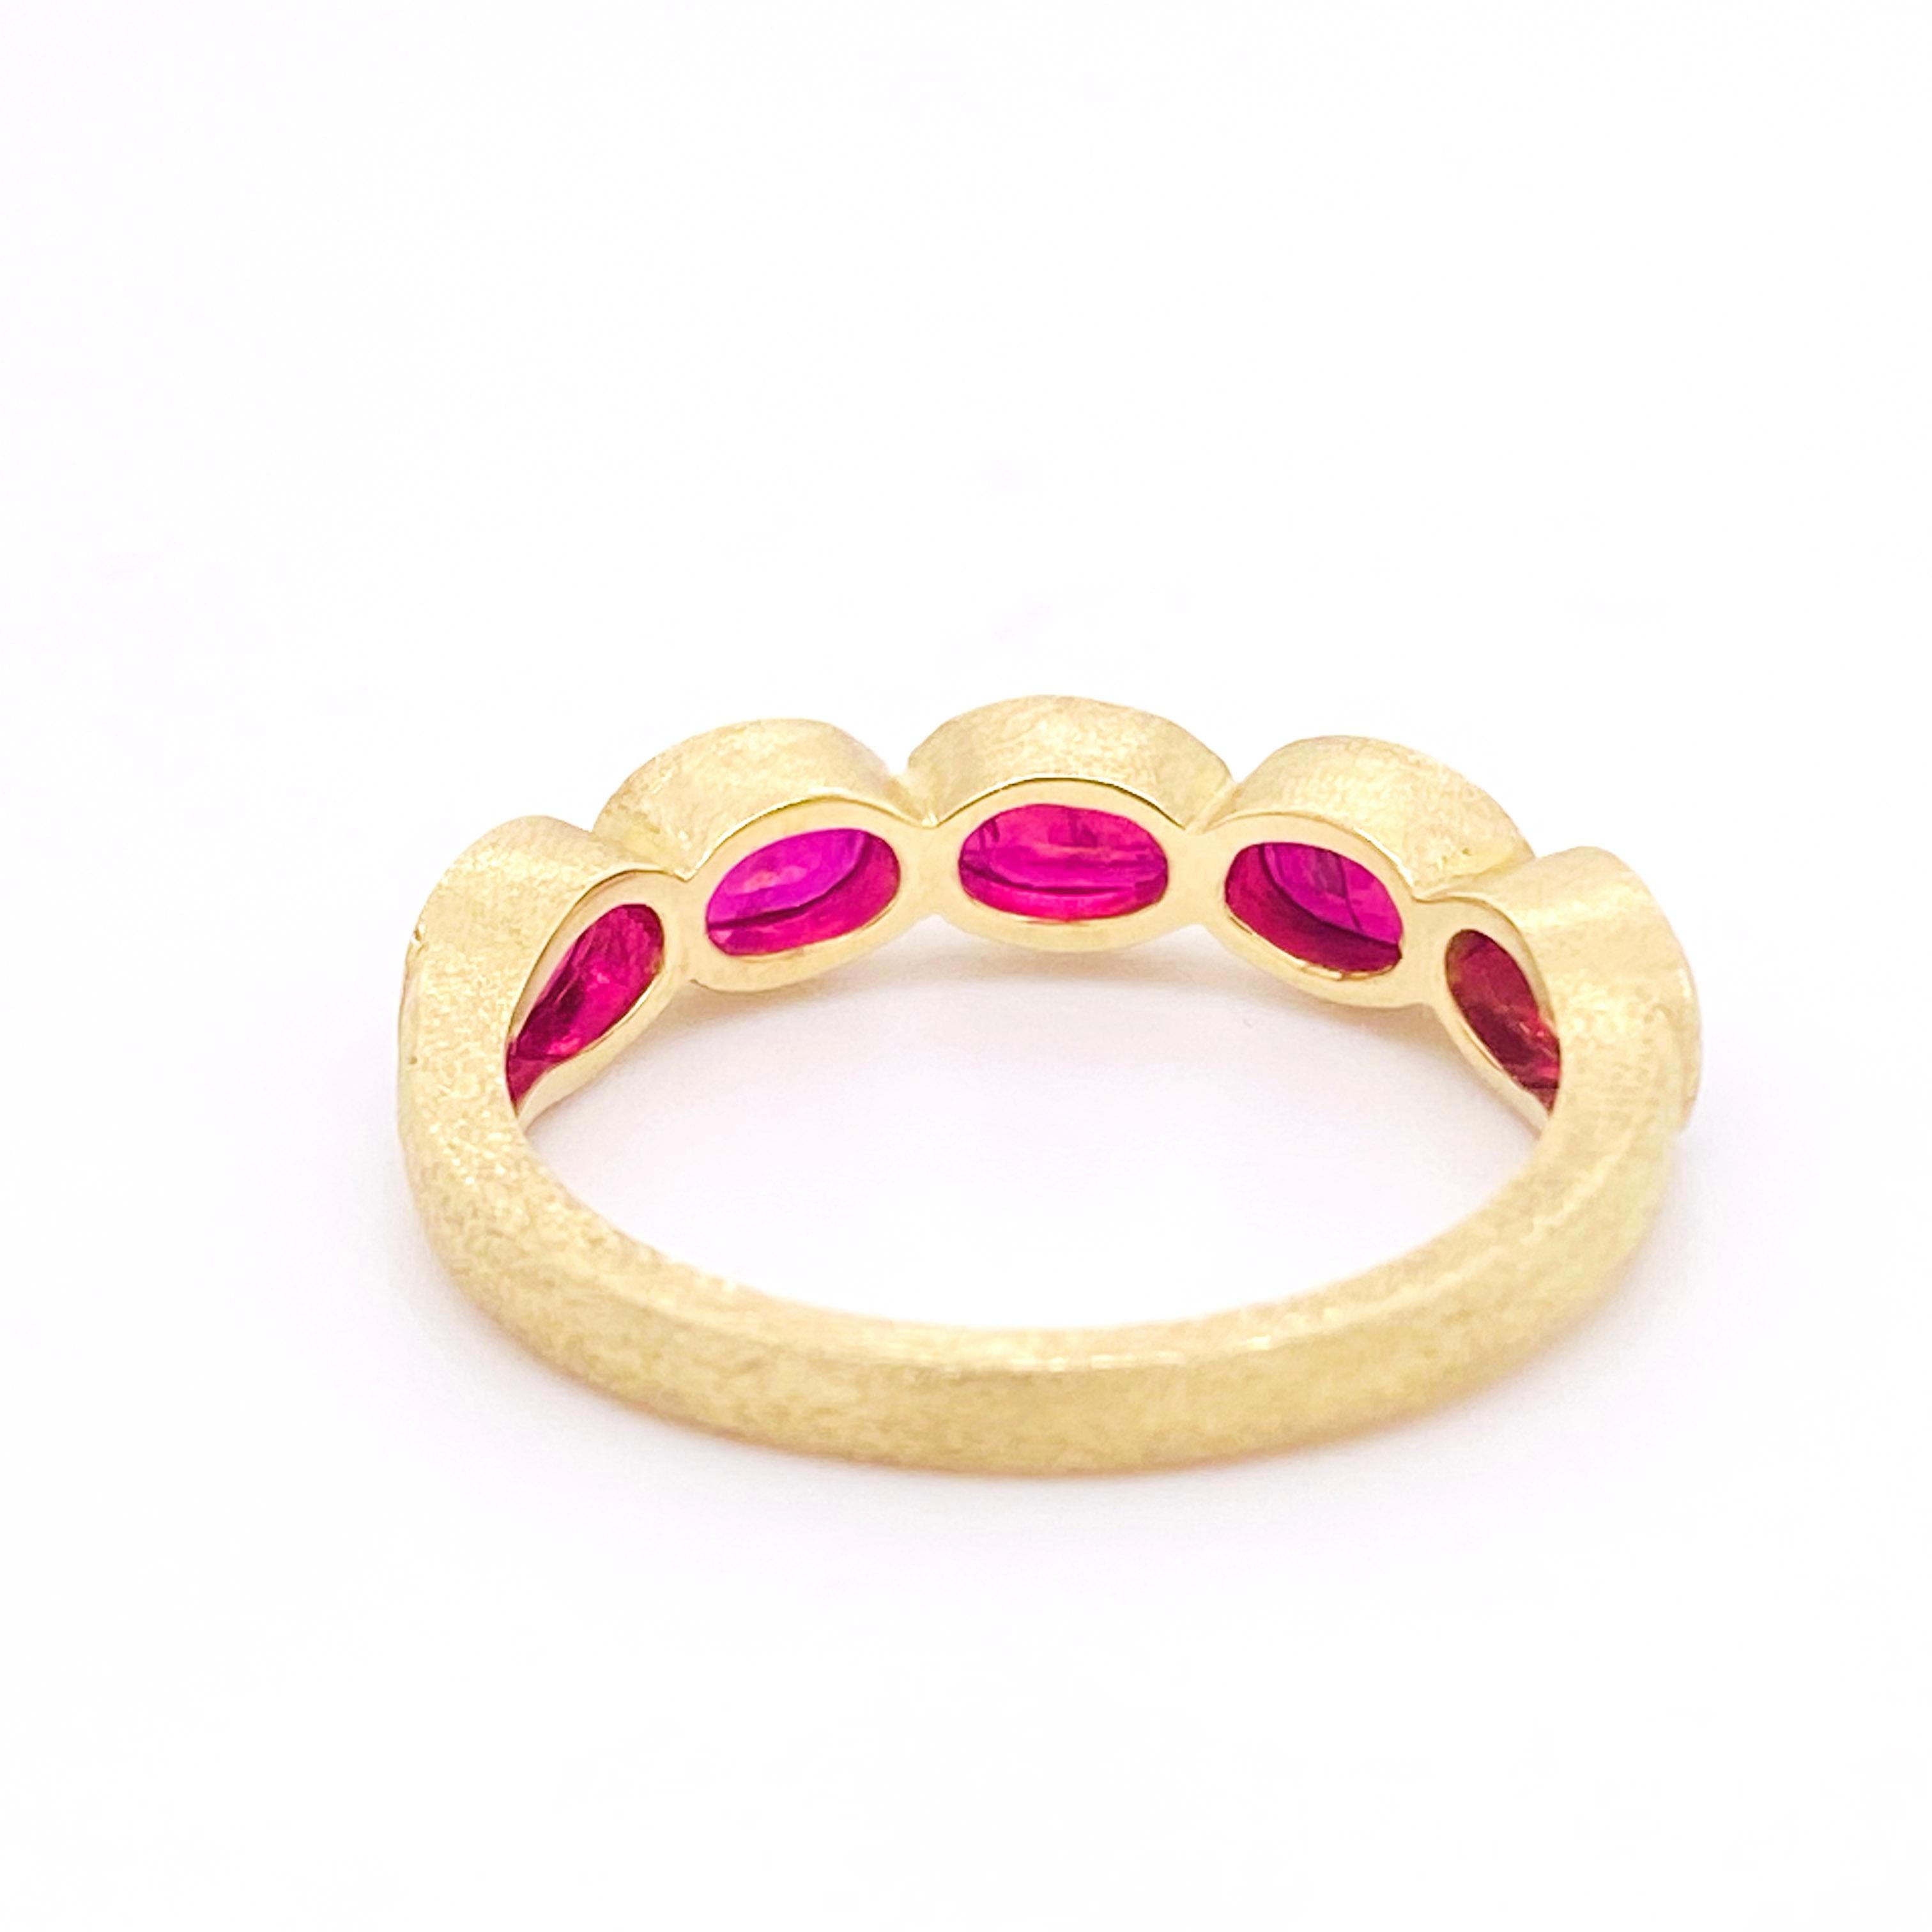 Oval Cut Ruby Band Ring, Yellow Gold Satin 1.52 Carat TW Gorgeous CUSTOM ORDER 4-5 WEEKS For Sale